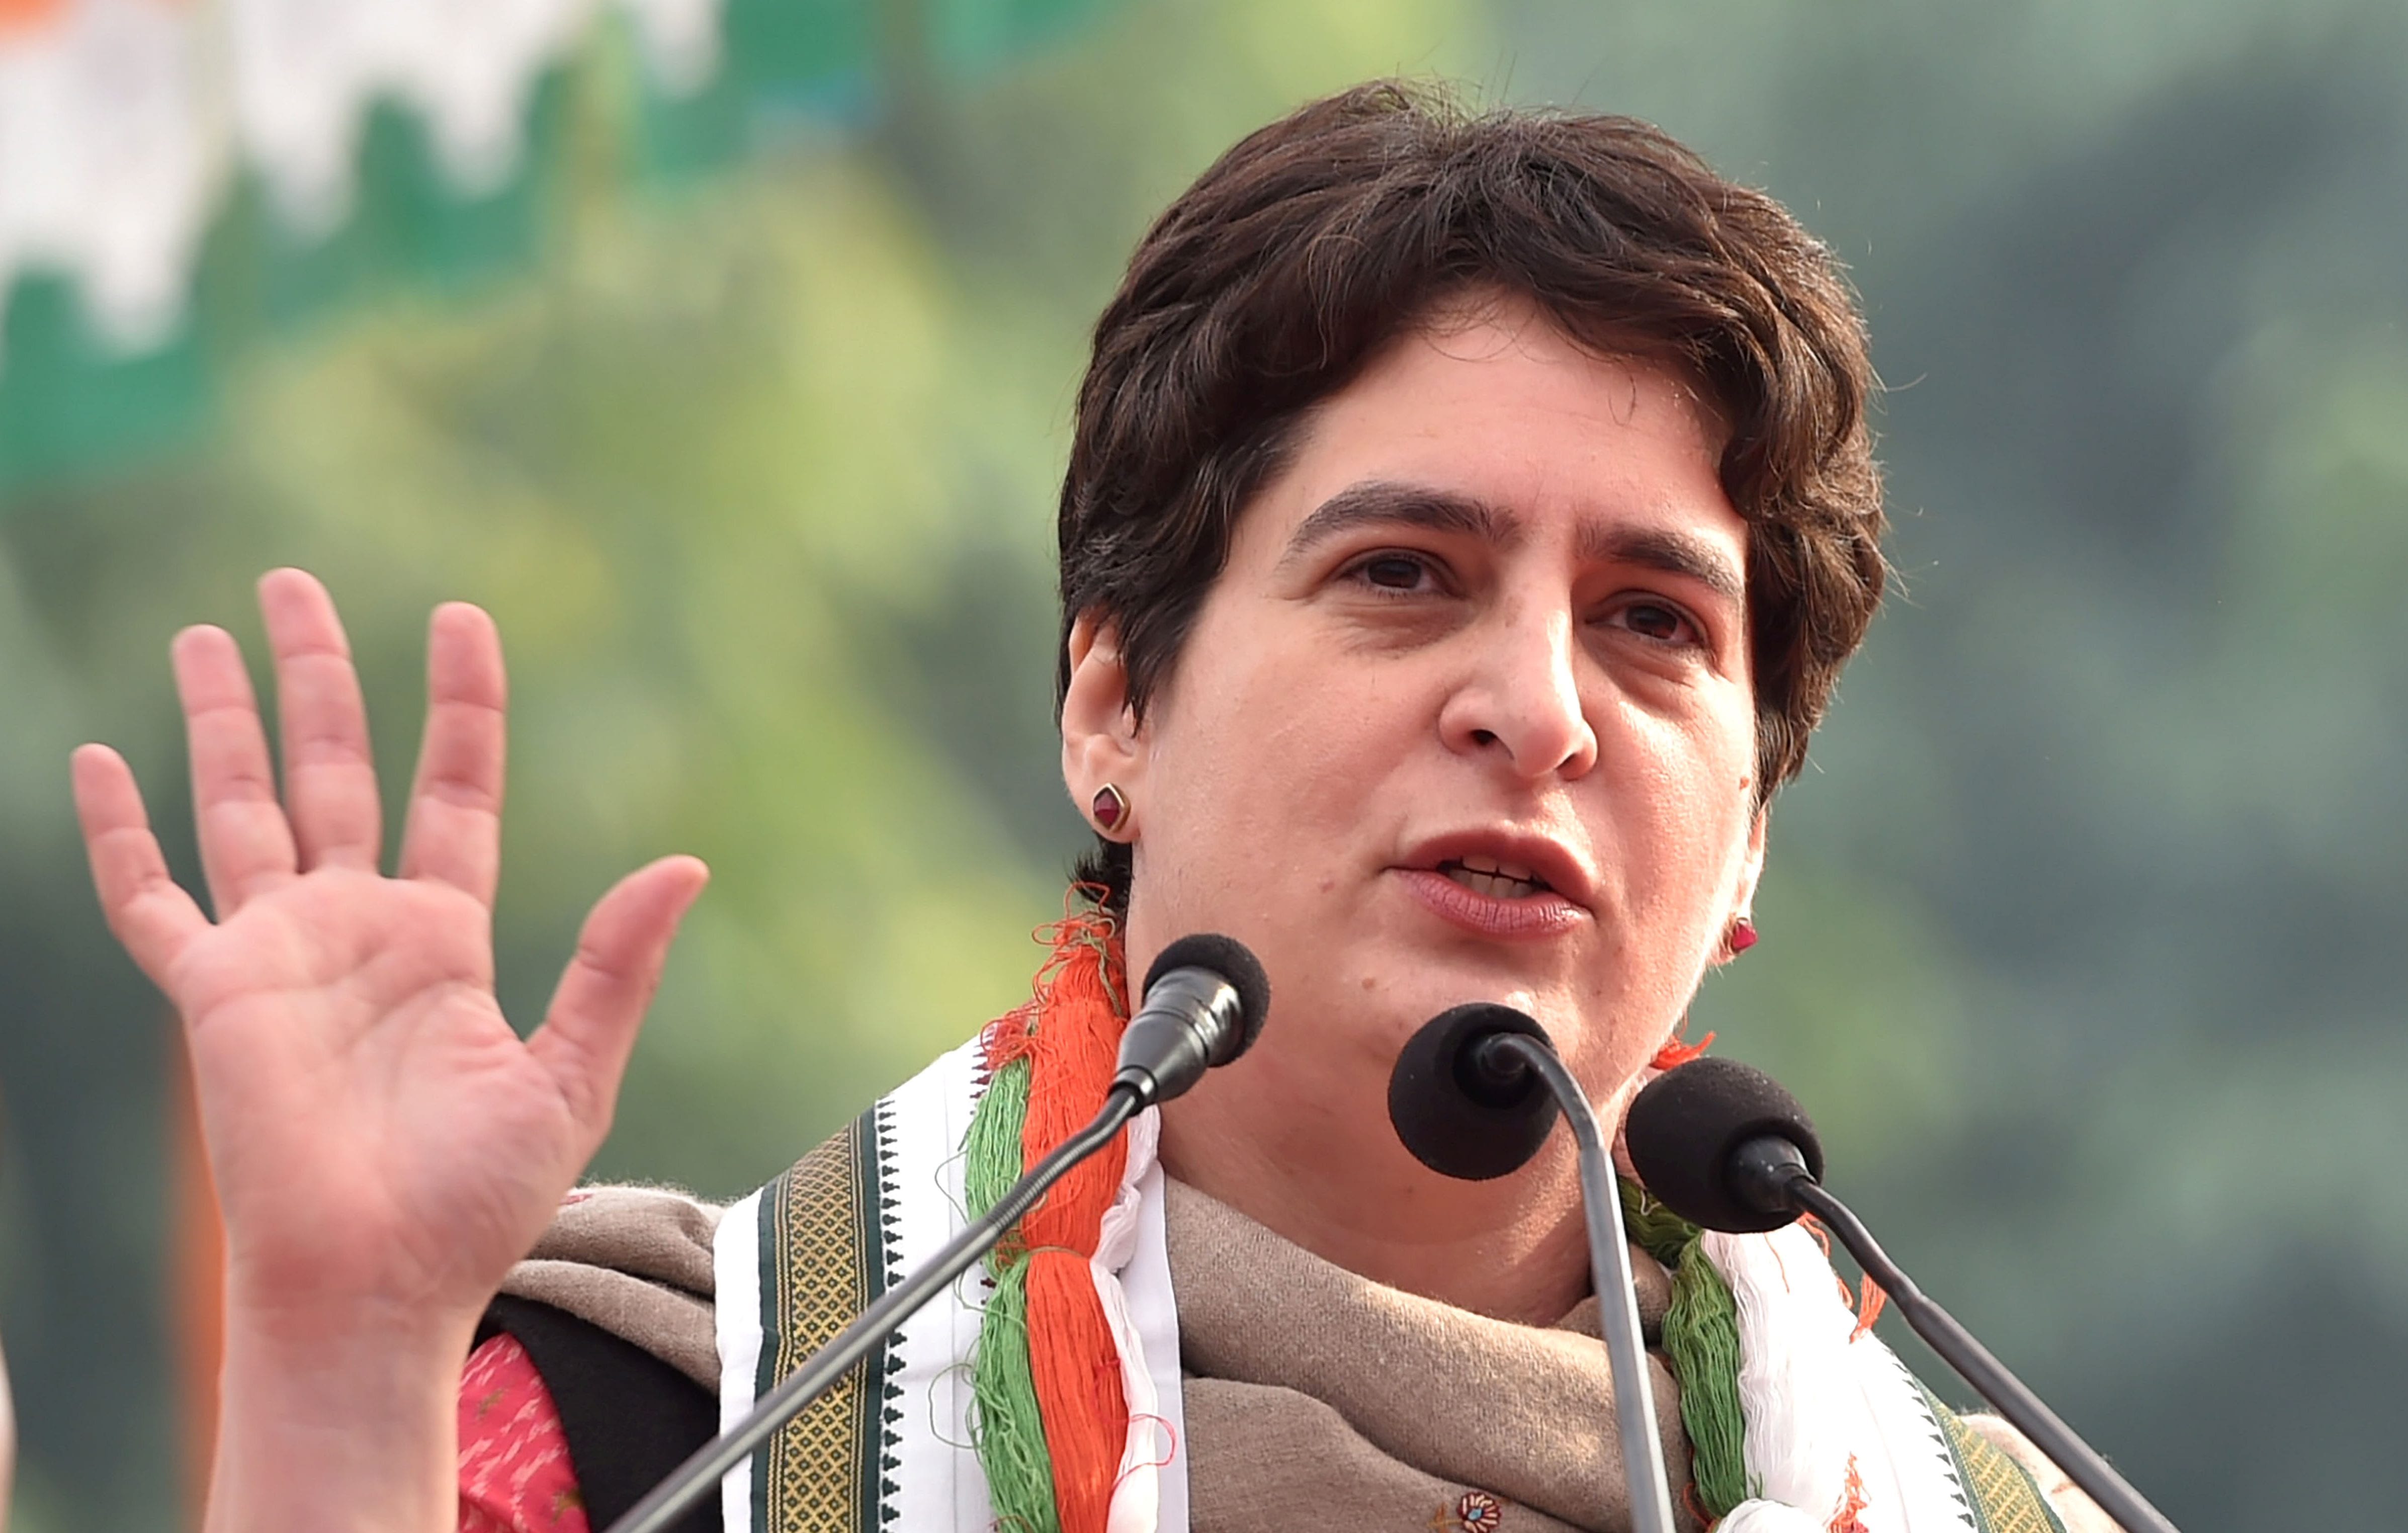 Put all resources in saving lives instead of building house for PM, says Priyanka Gandhi